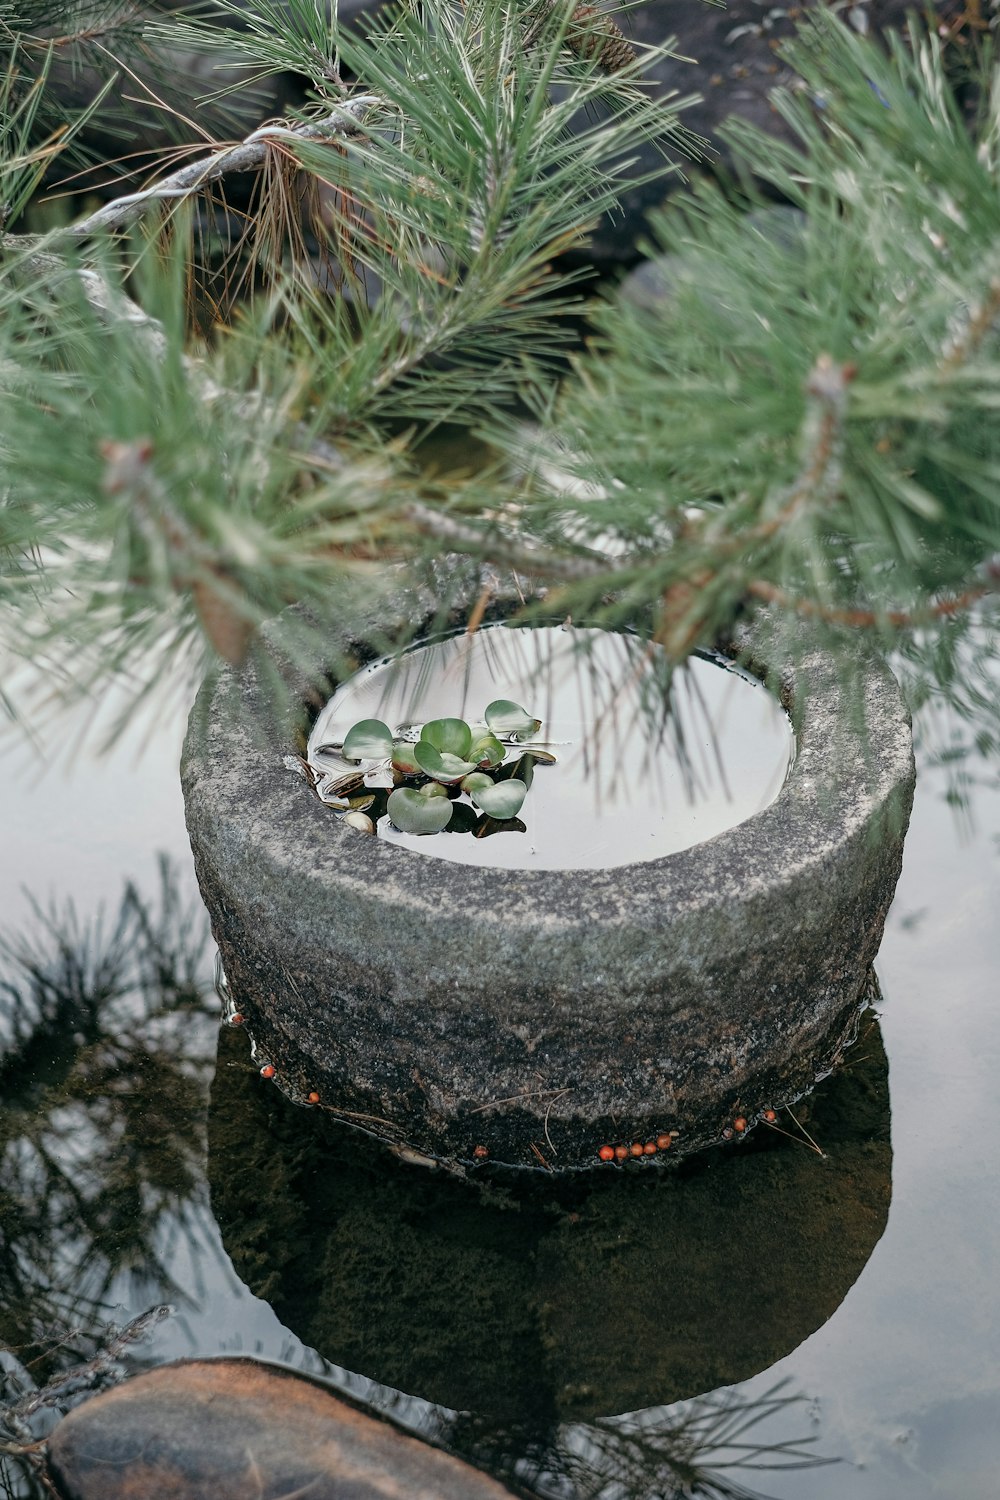 a plant is growing out of a rock in a pond